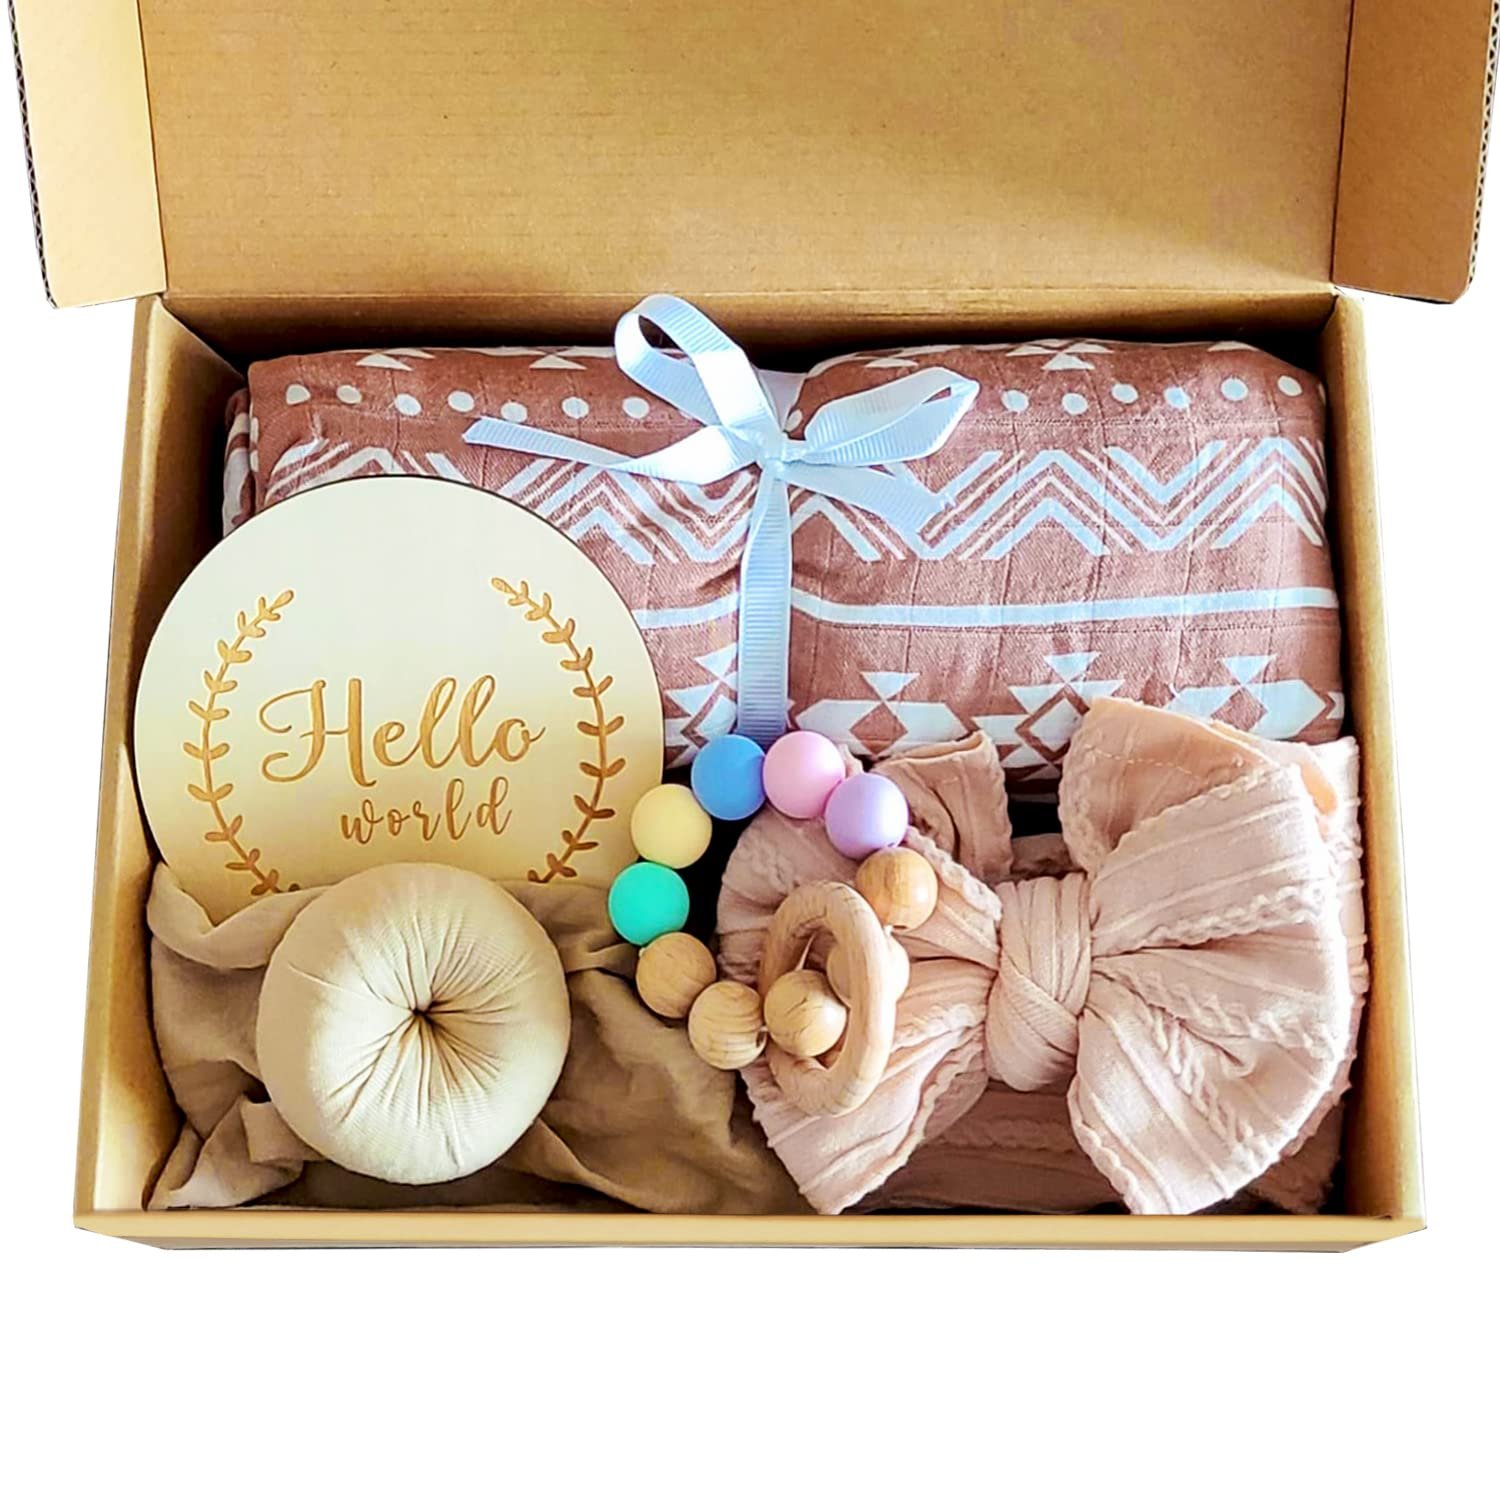 Newborn Baby Gift Set for Girls - Baby Shower Gifts, Baby Gift Set, Baby Girl Gifts, Baby Welcome Box, Newborn Gift Set with Essential Baby Items and Accessories